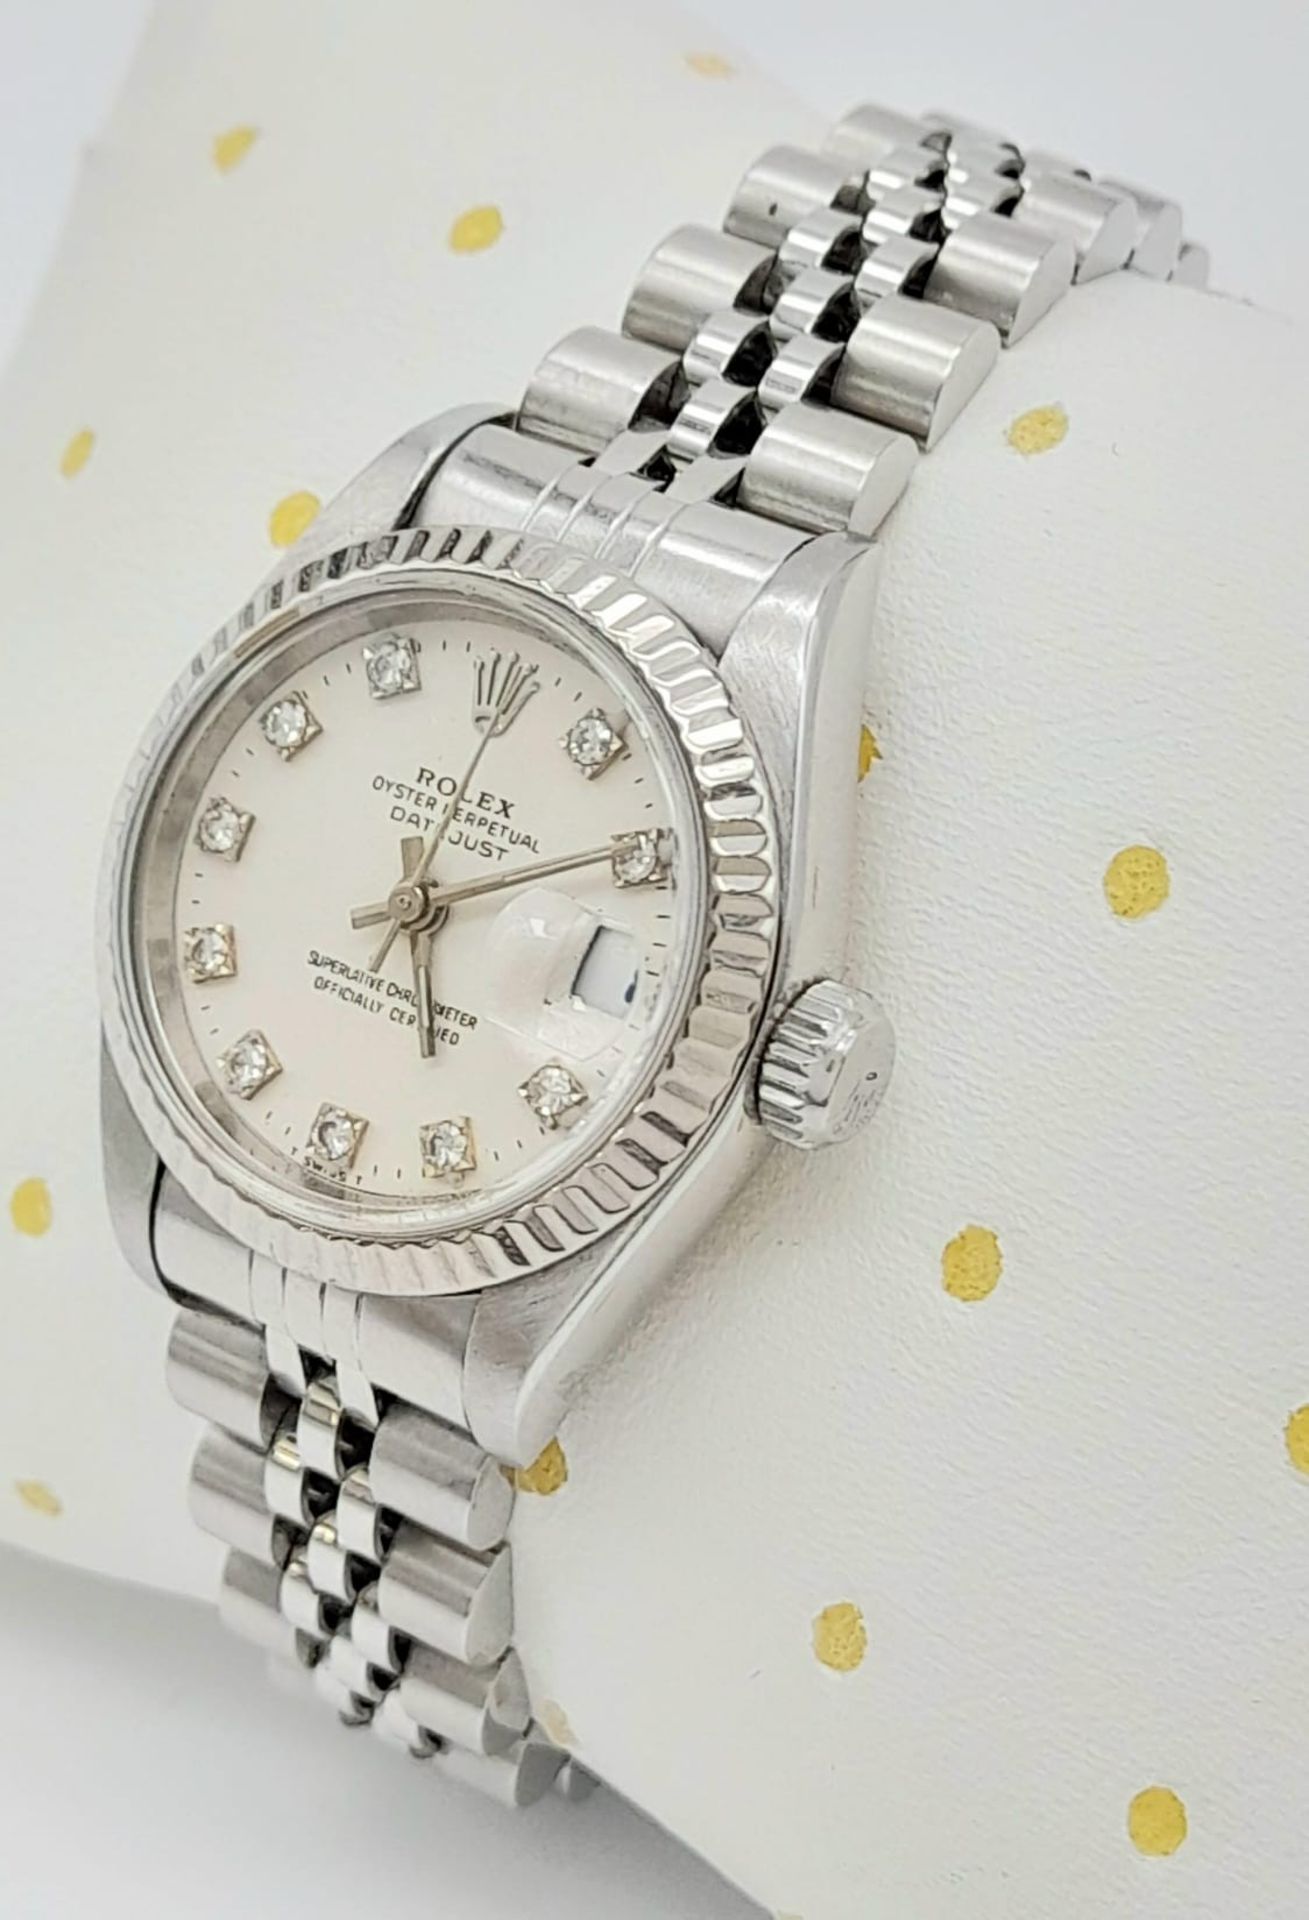 A Rolex Oyster Perpetual Datejust Ladies Watch. Stainless steel bracelet and case - 26mm. White dial - Bild 2 aus 8